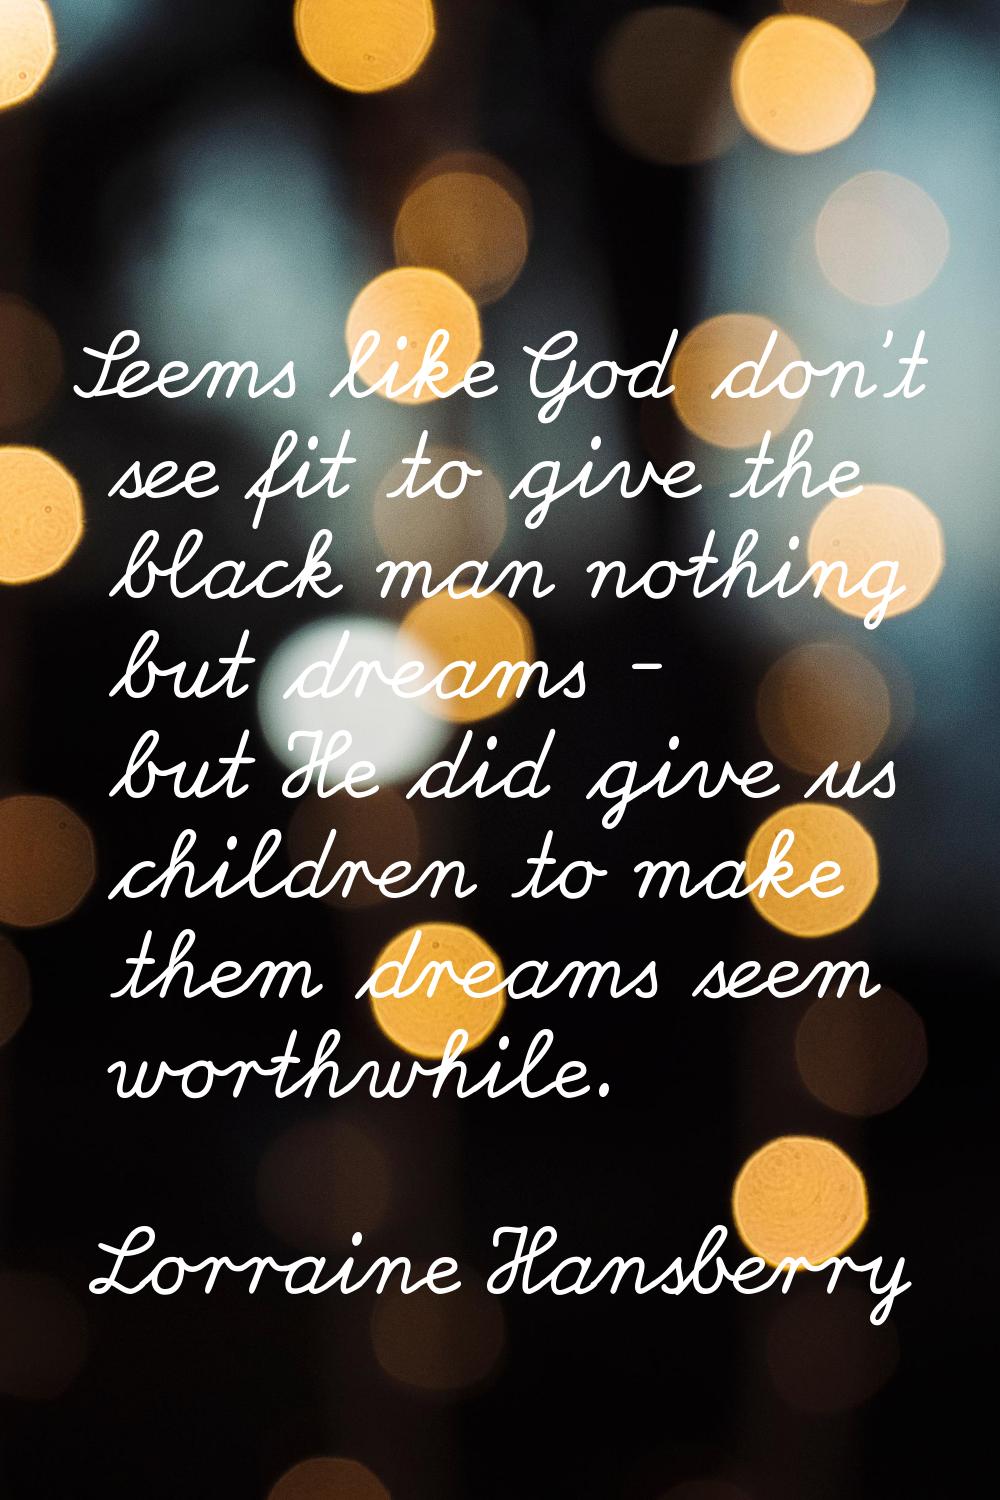 Seems like God don't see fit to give the black man nothing but dreams - but He did give us children